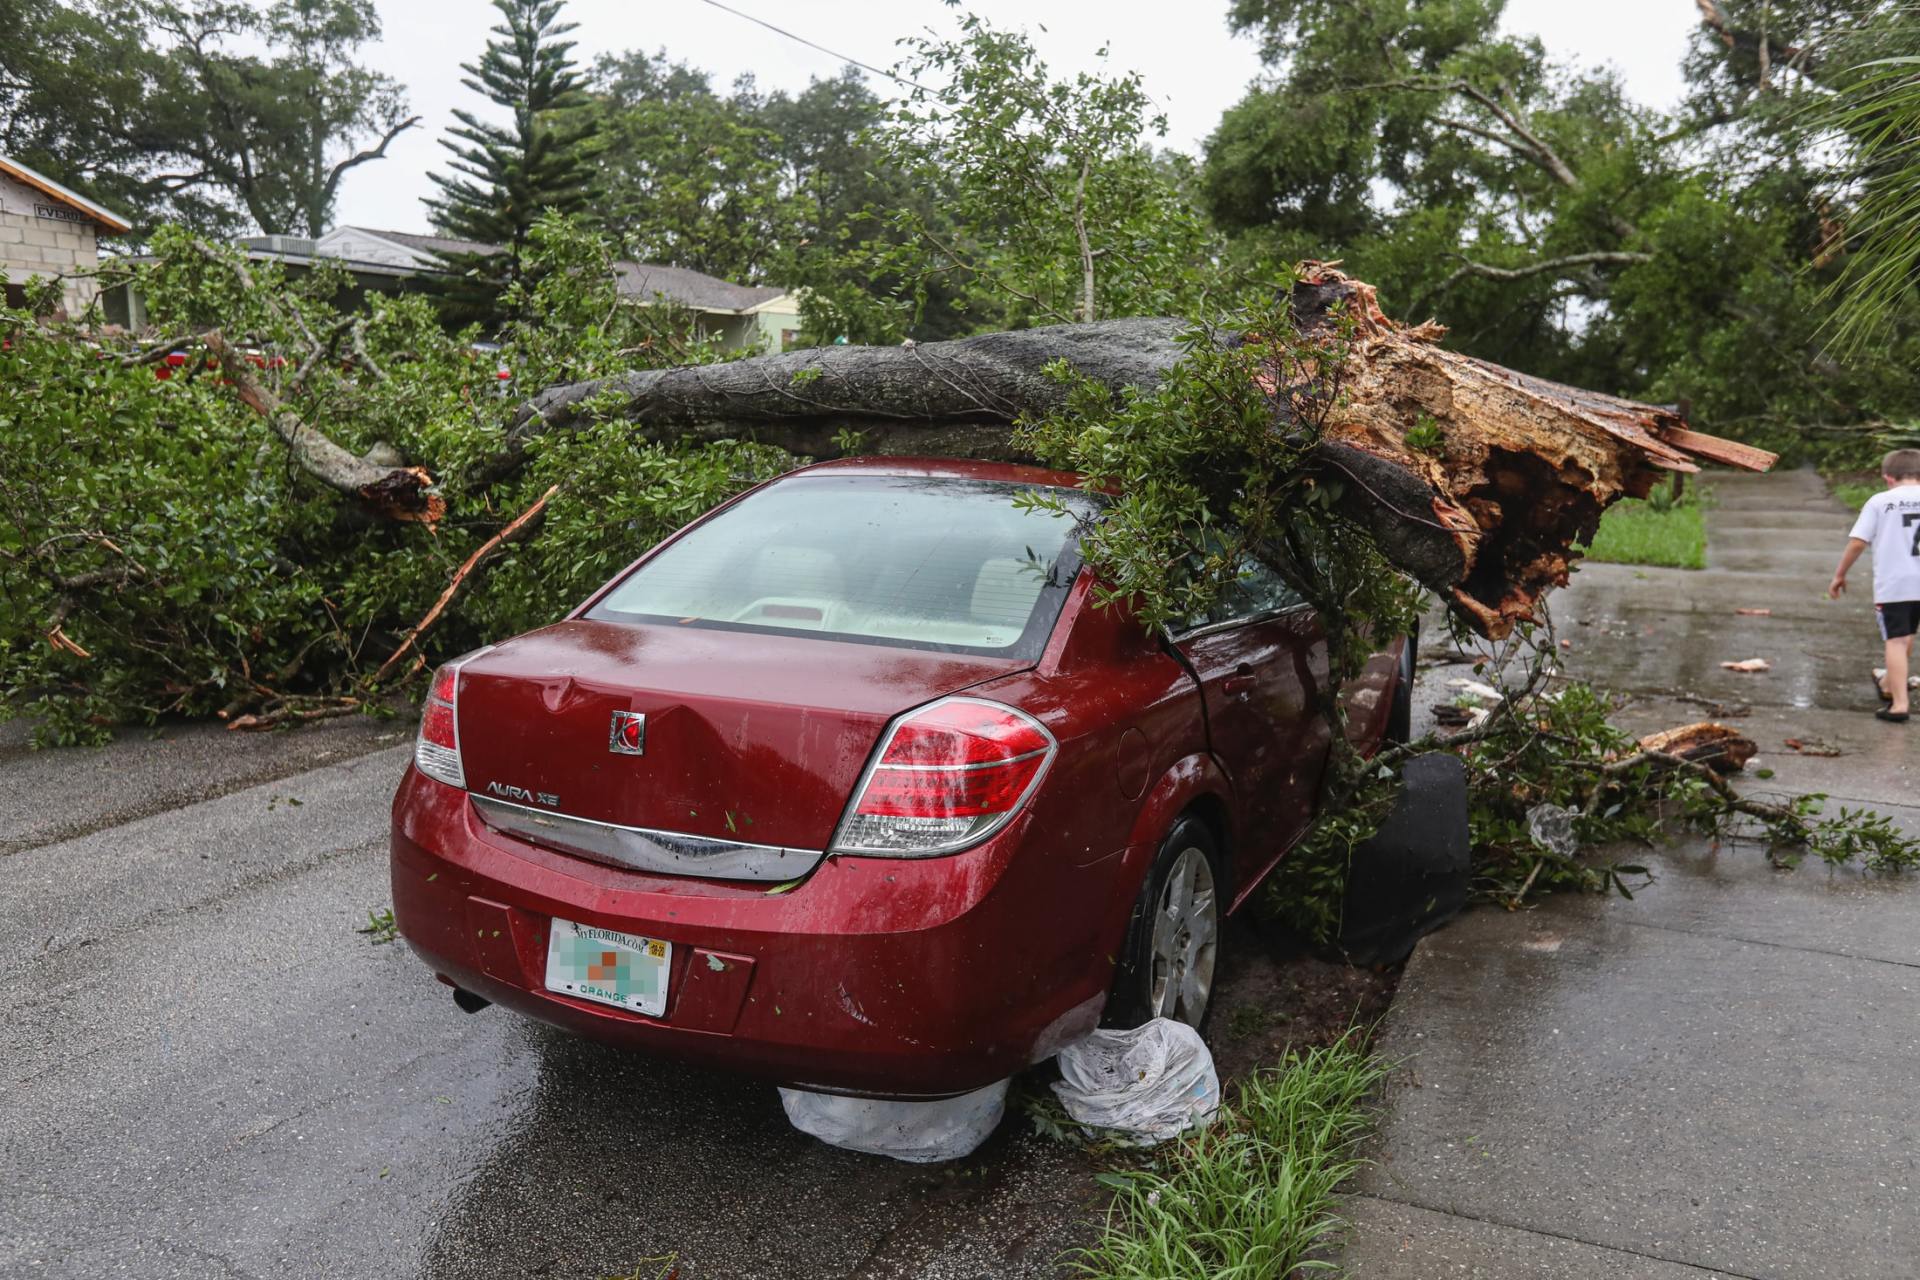 Maintain your trees to stop damage in the summer storms